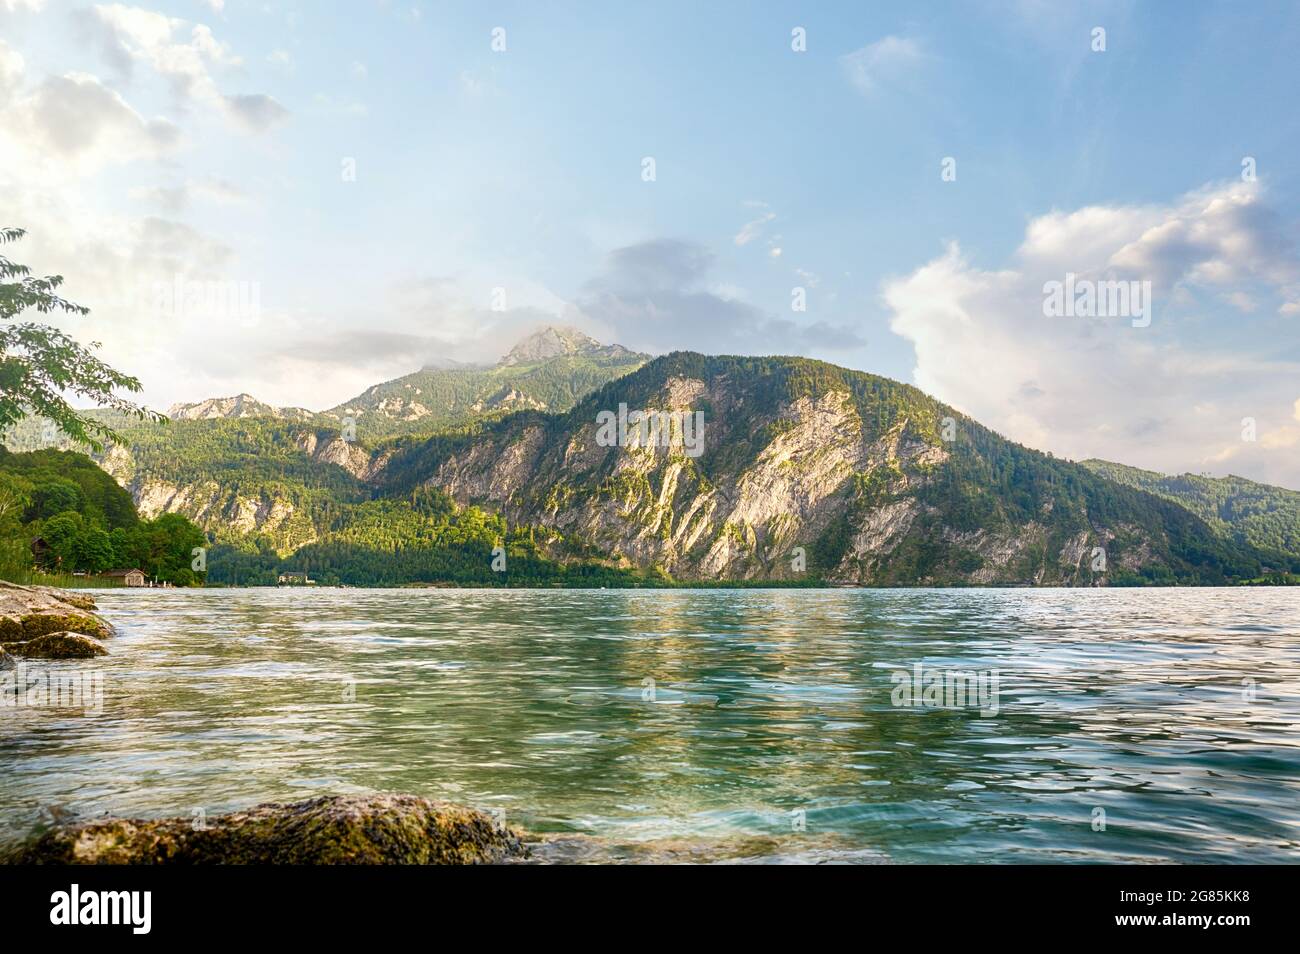 Beautiful Lake Mondsee and the Schafberg mountain in the Salzkammergut during summer time. Austria, Europe. Stock Photo